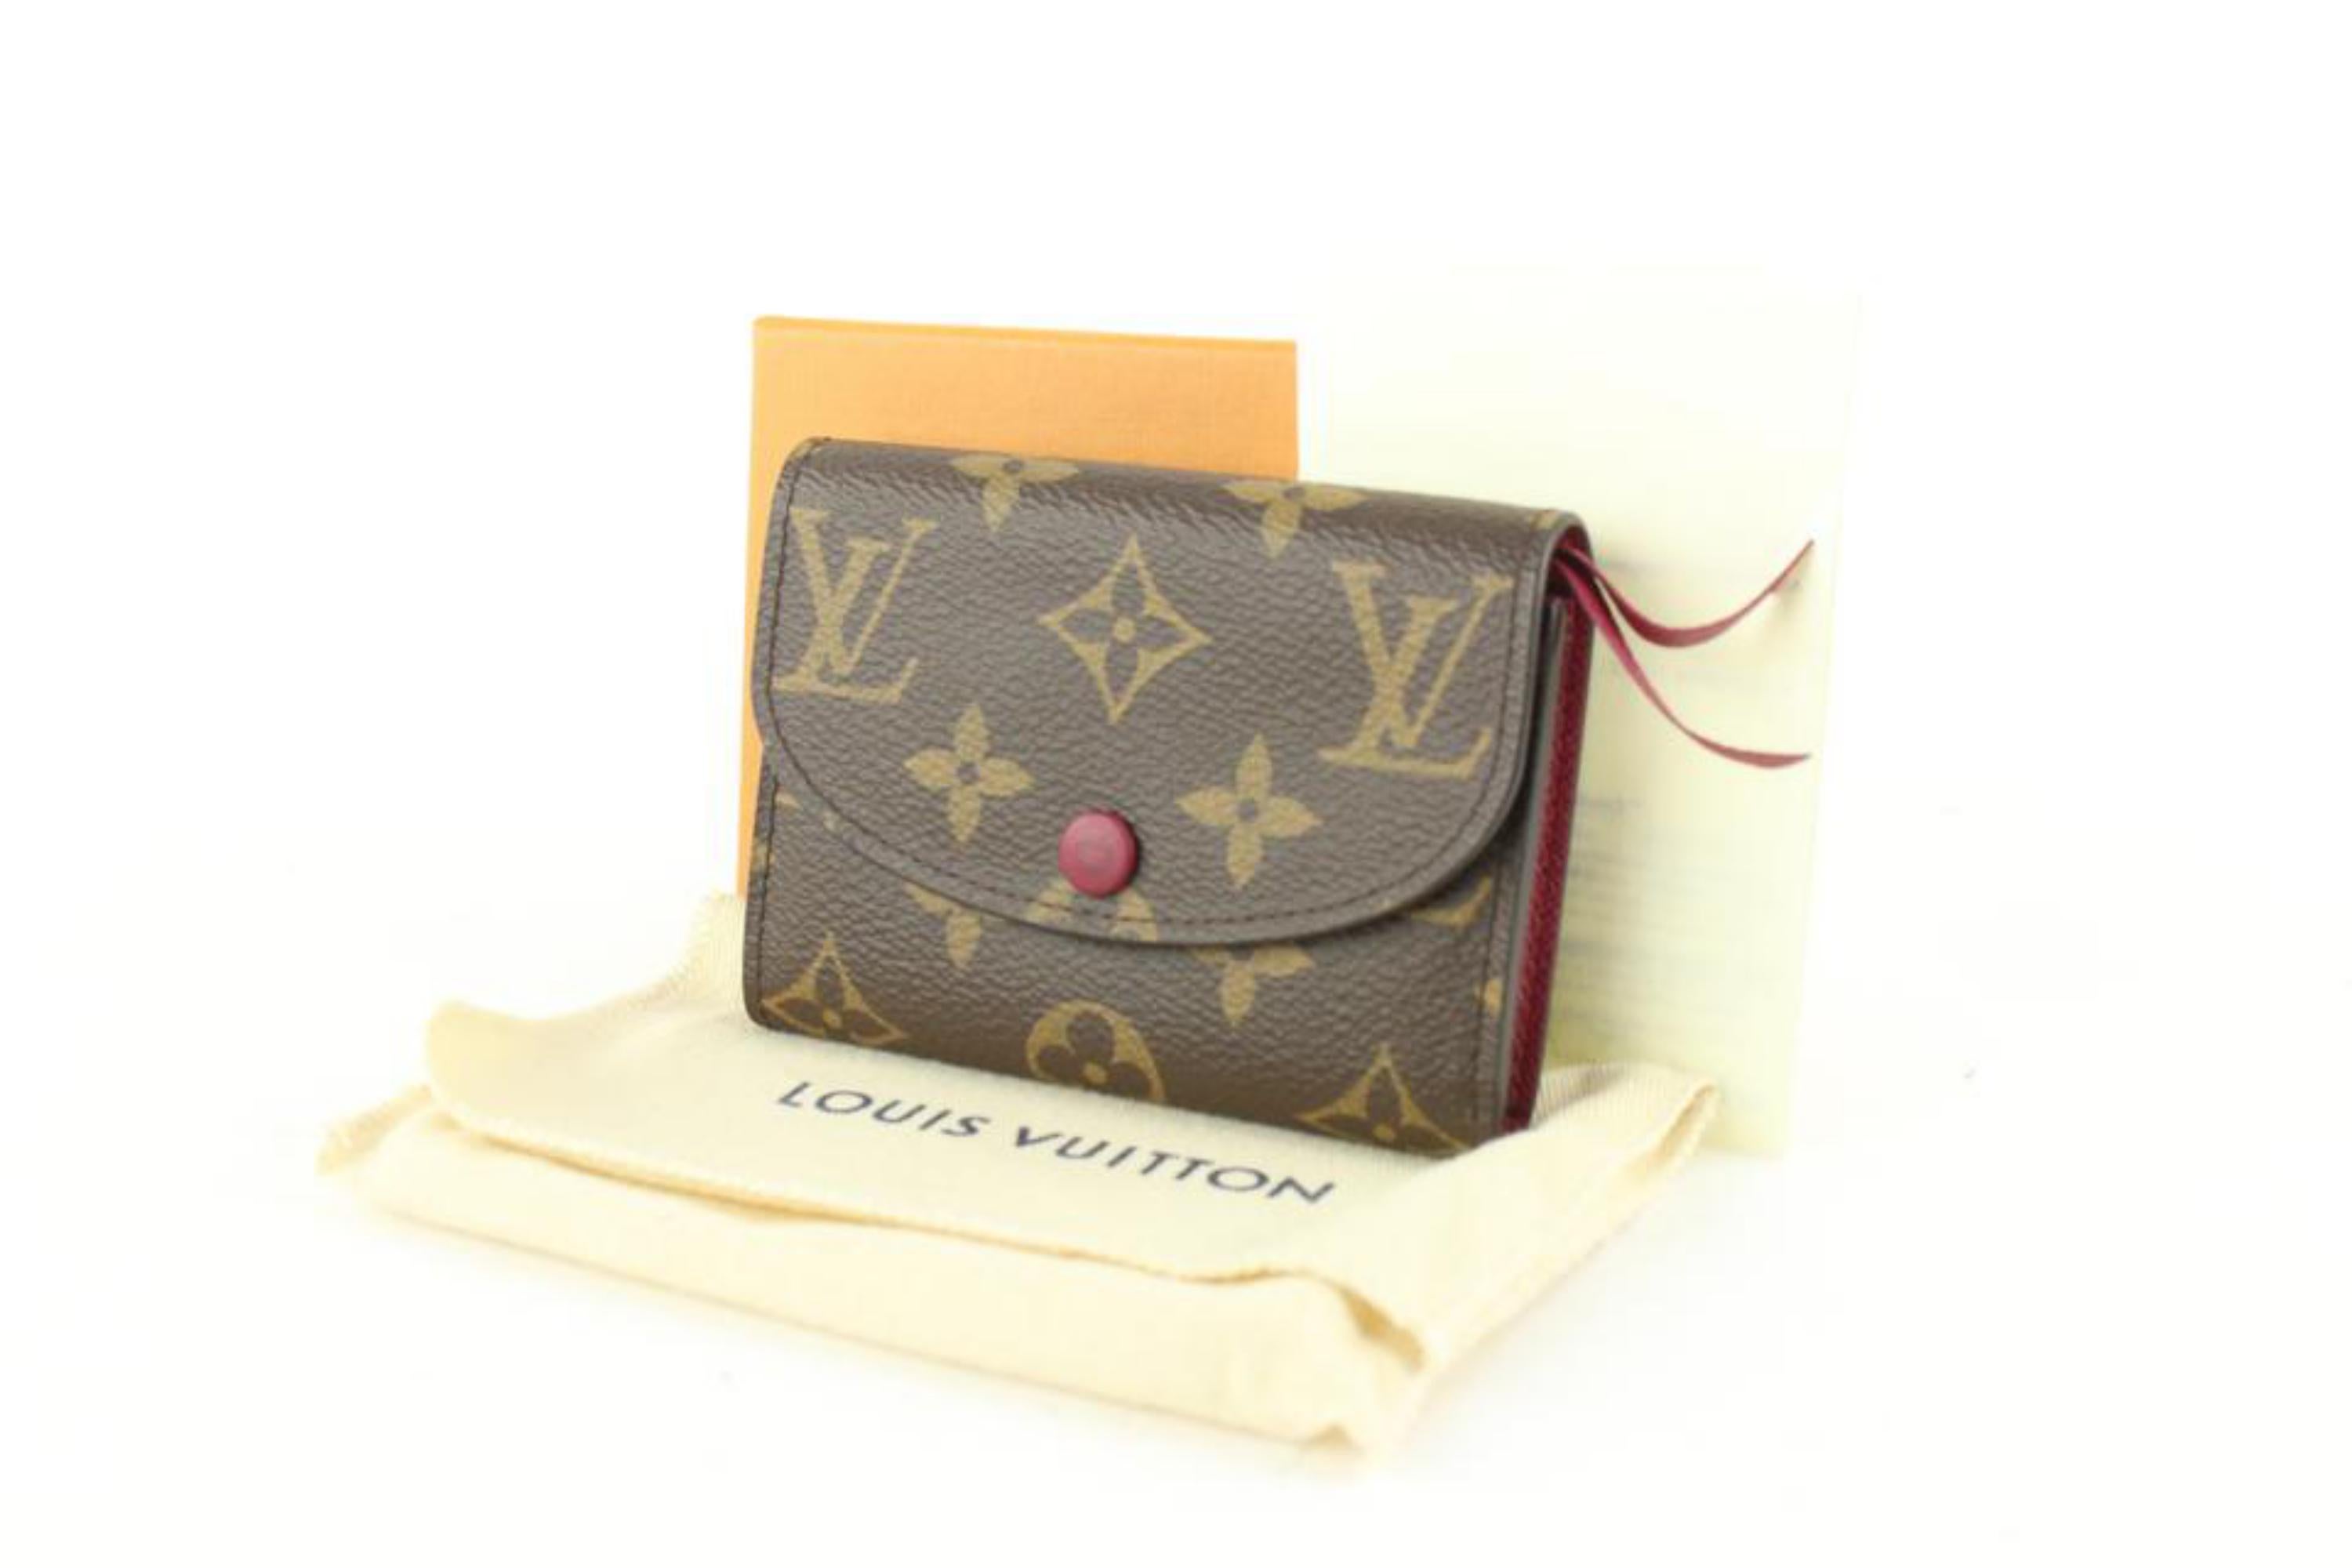 Louis Vuitton Burgundy Monogram Rosalie Compact Wallet Coin Purse 1222lv32
Date Code/Serial Number: UB2117
Made In: Spain
Measurements: Length:  4.2